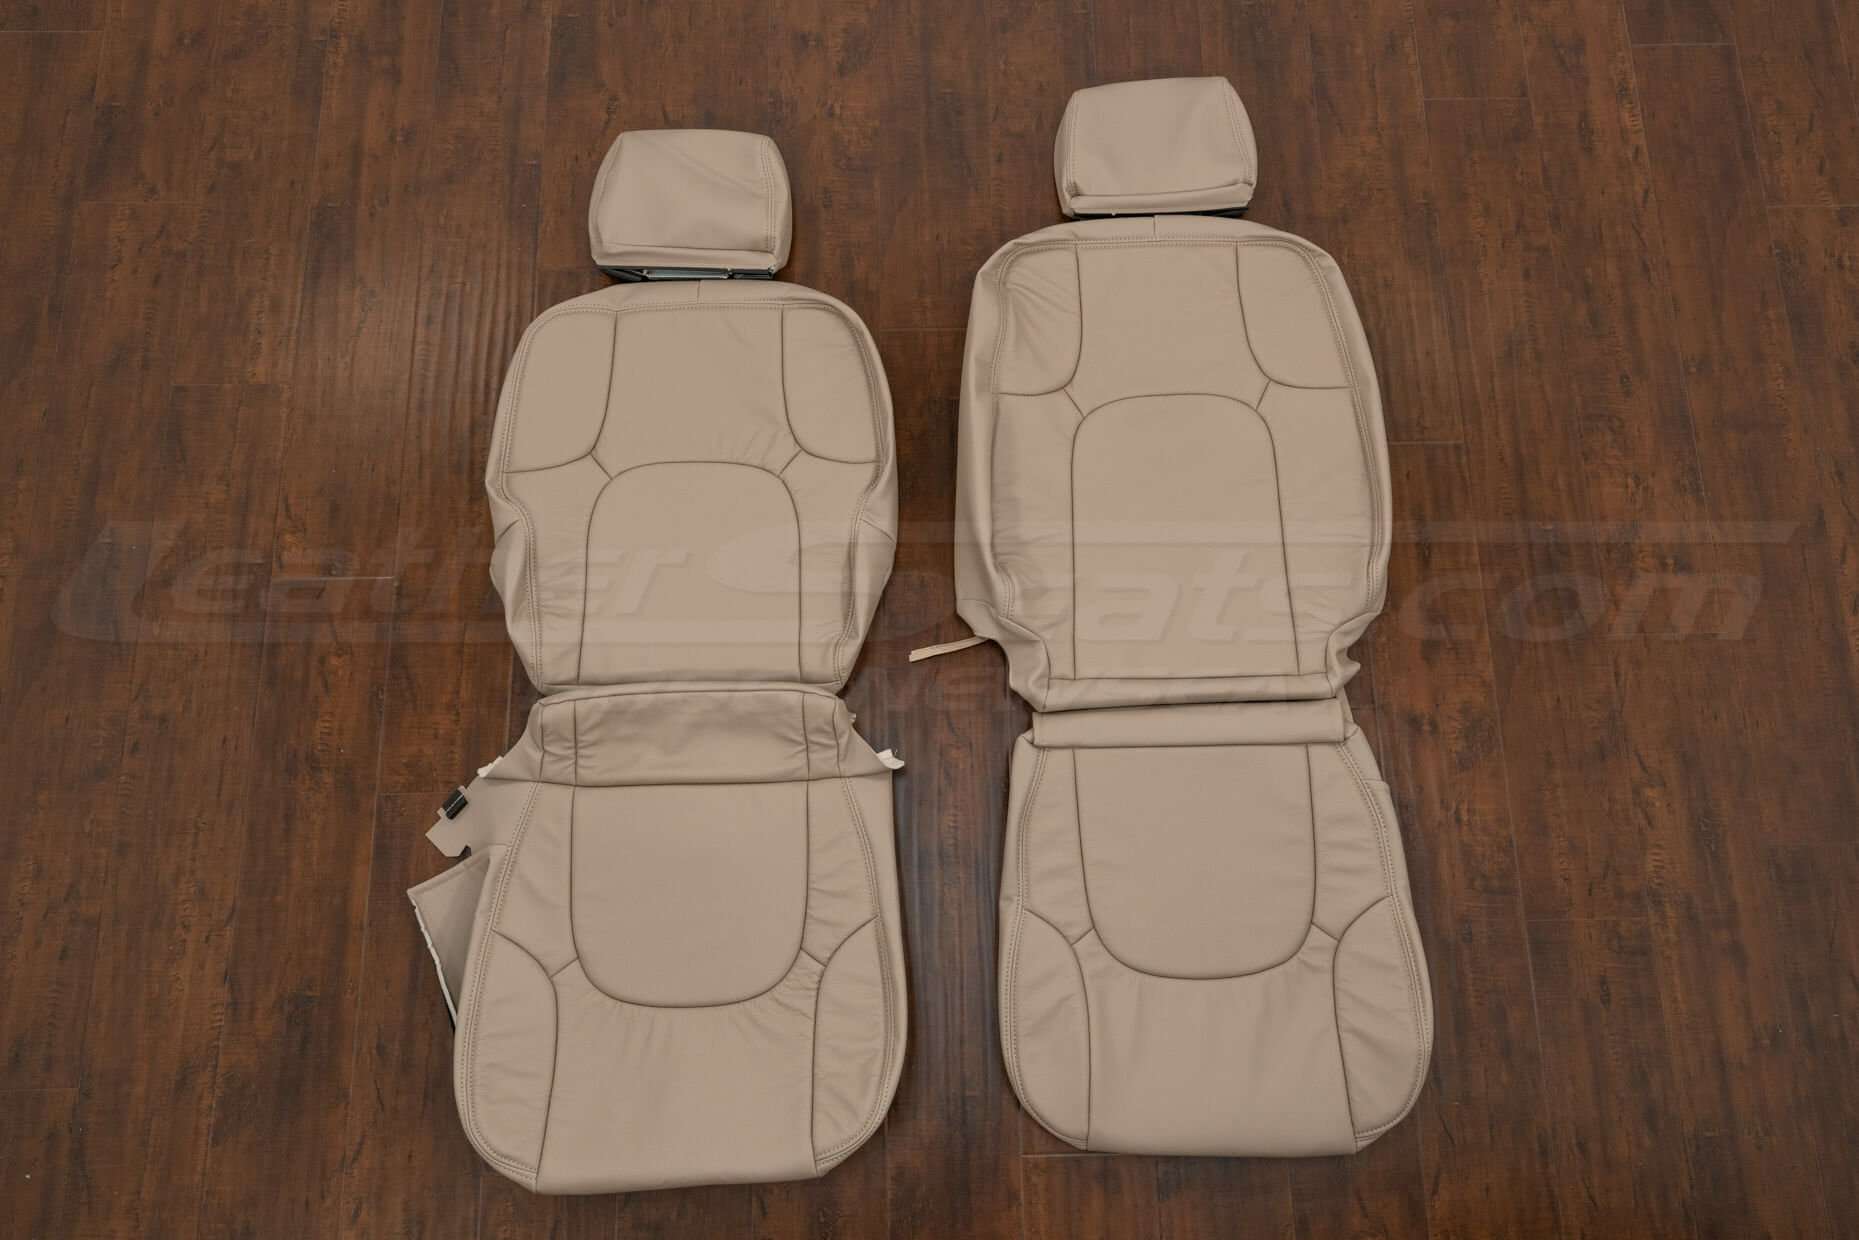 2010-2011 Nissan Titan Crew Can leather seat interior kit - Sandstone - Front seat upholstery